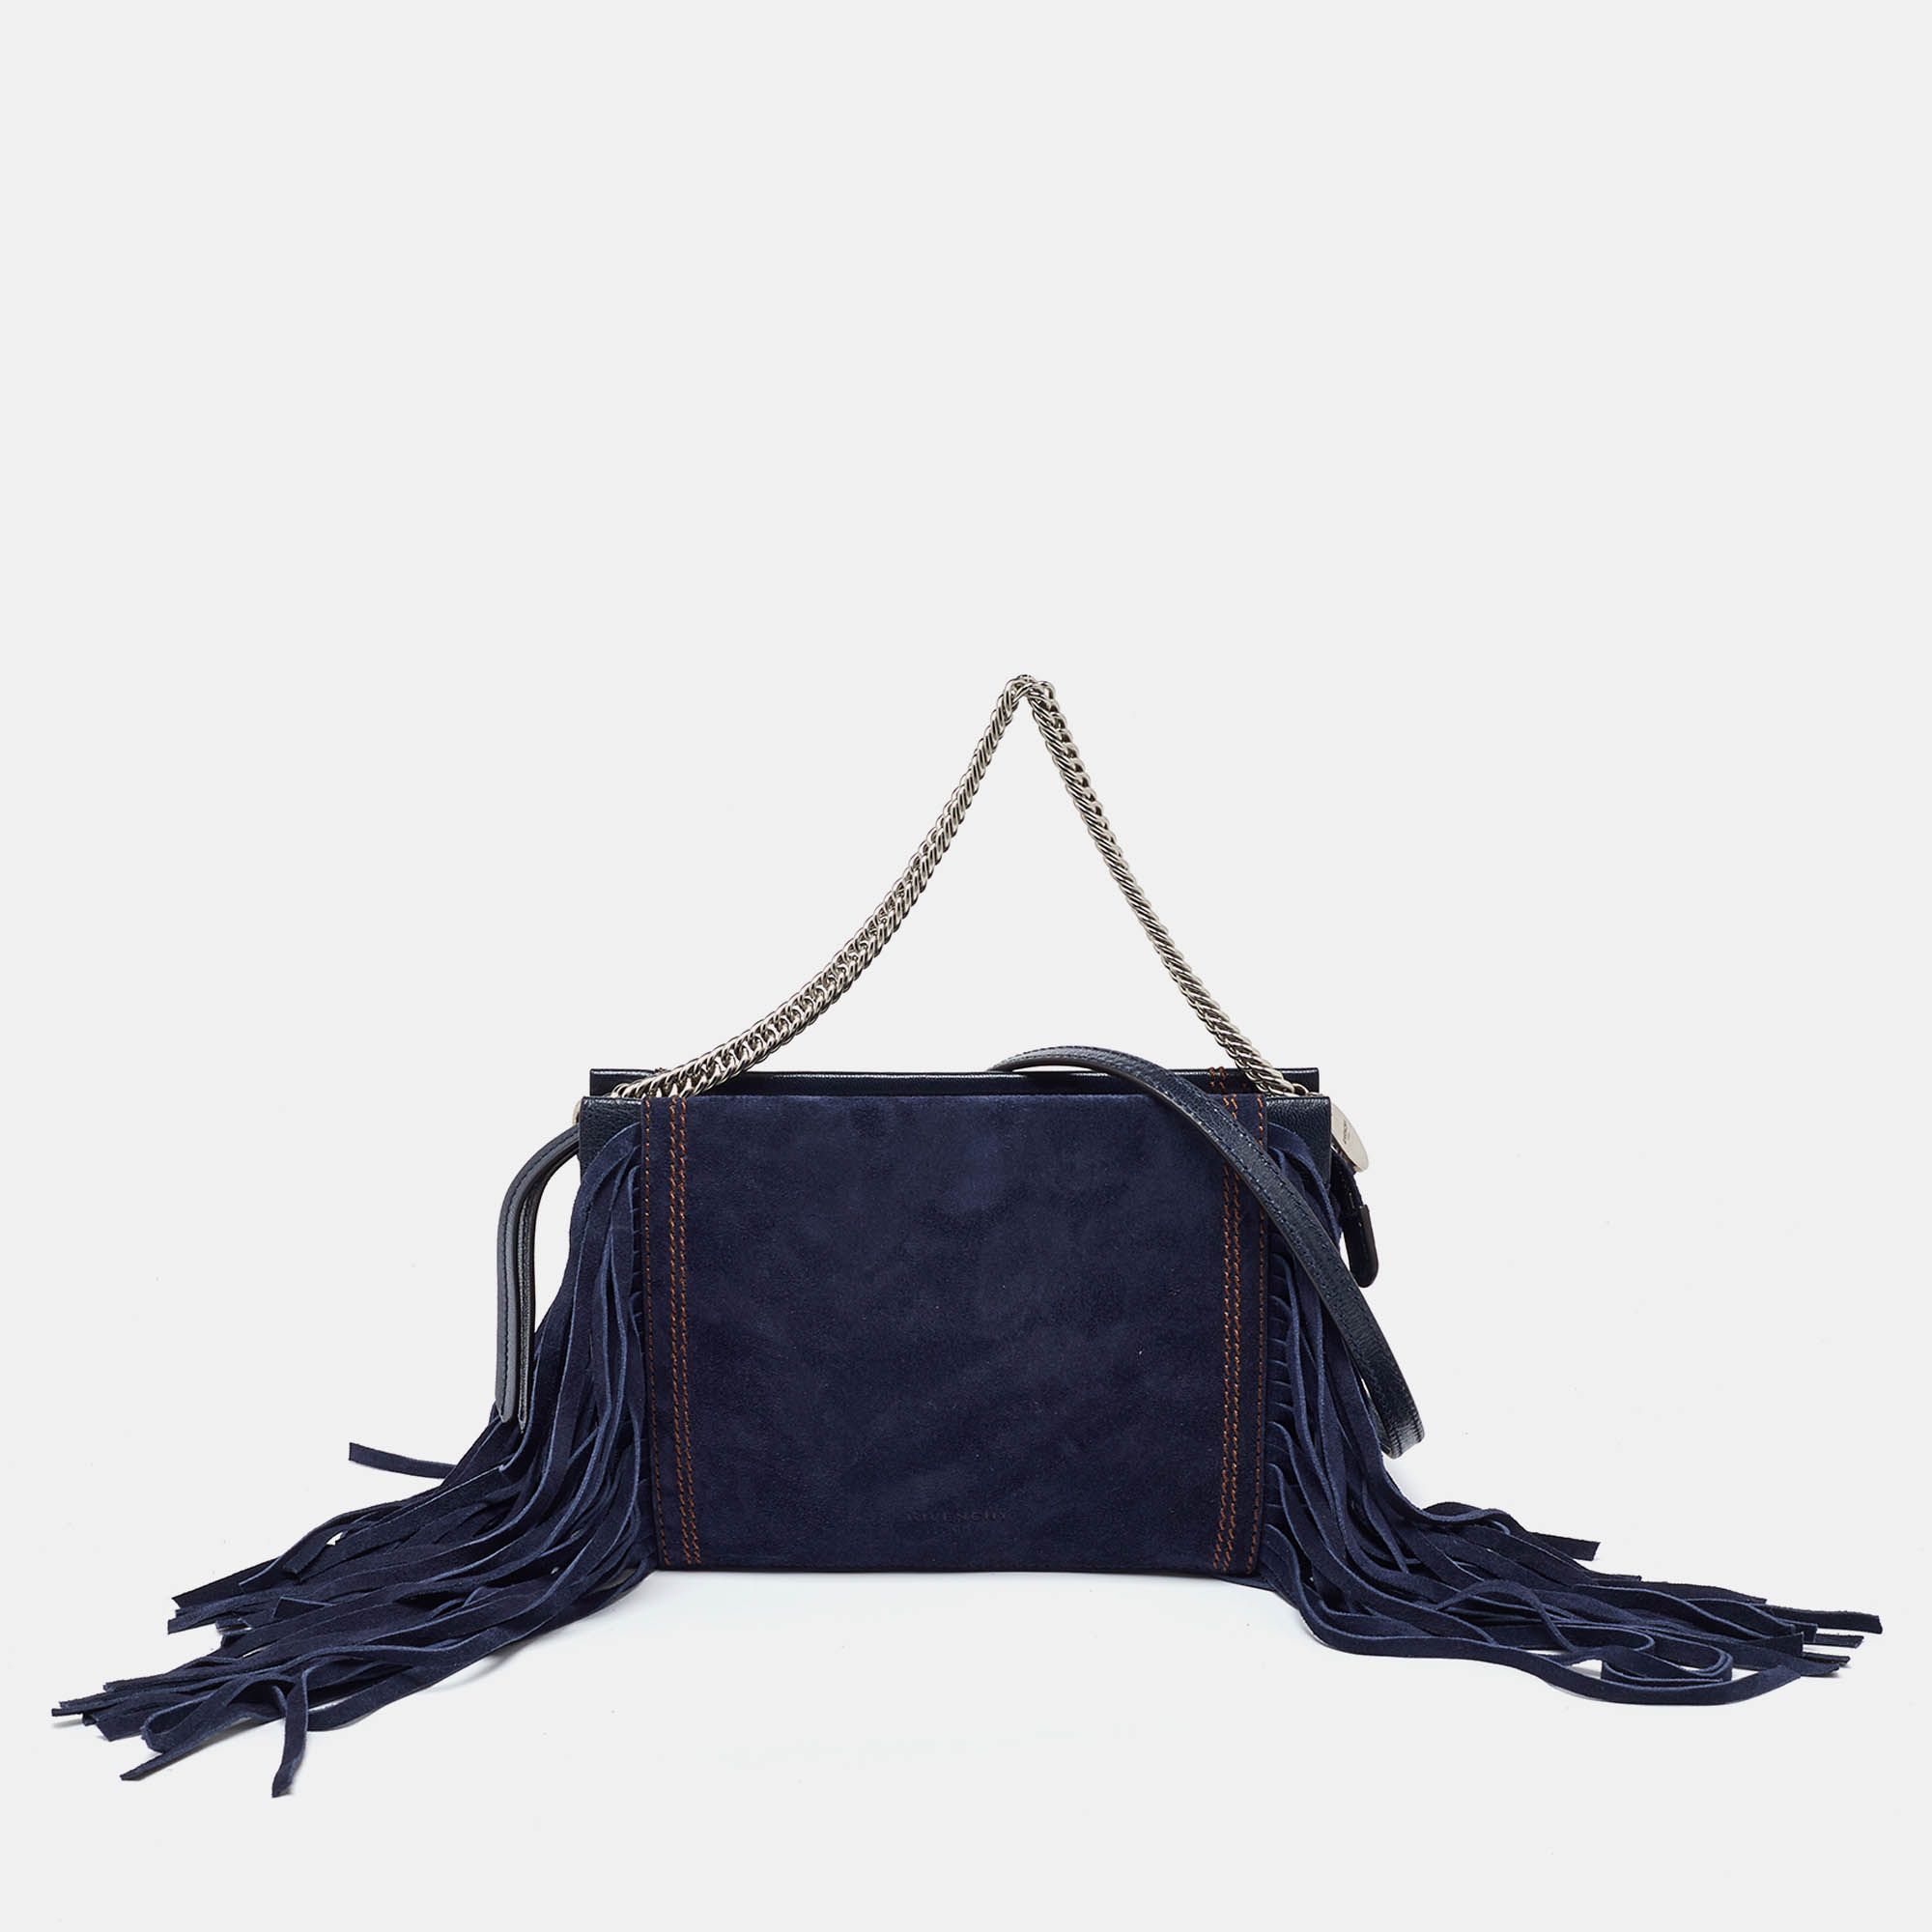 Givenchy navy blue leather and suede fringe crossbody bag